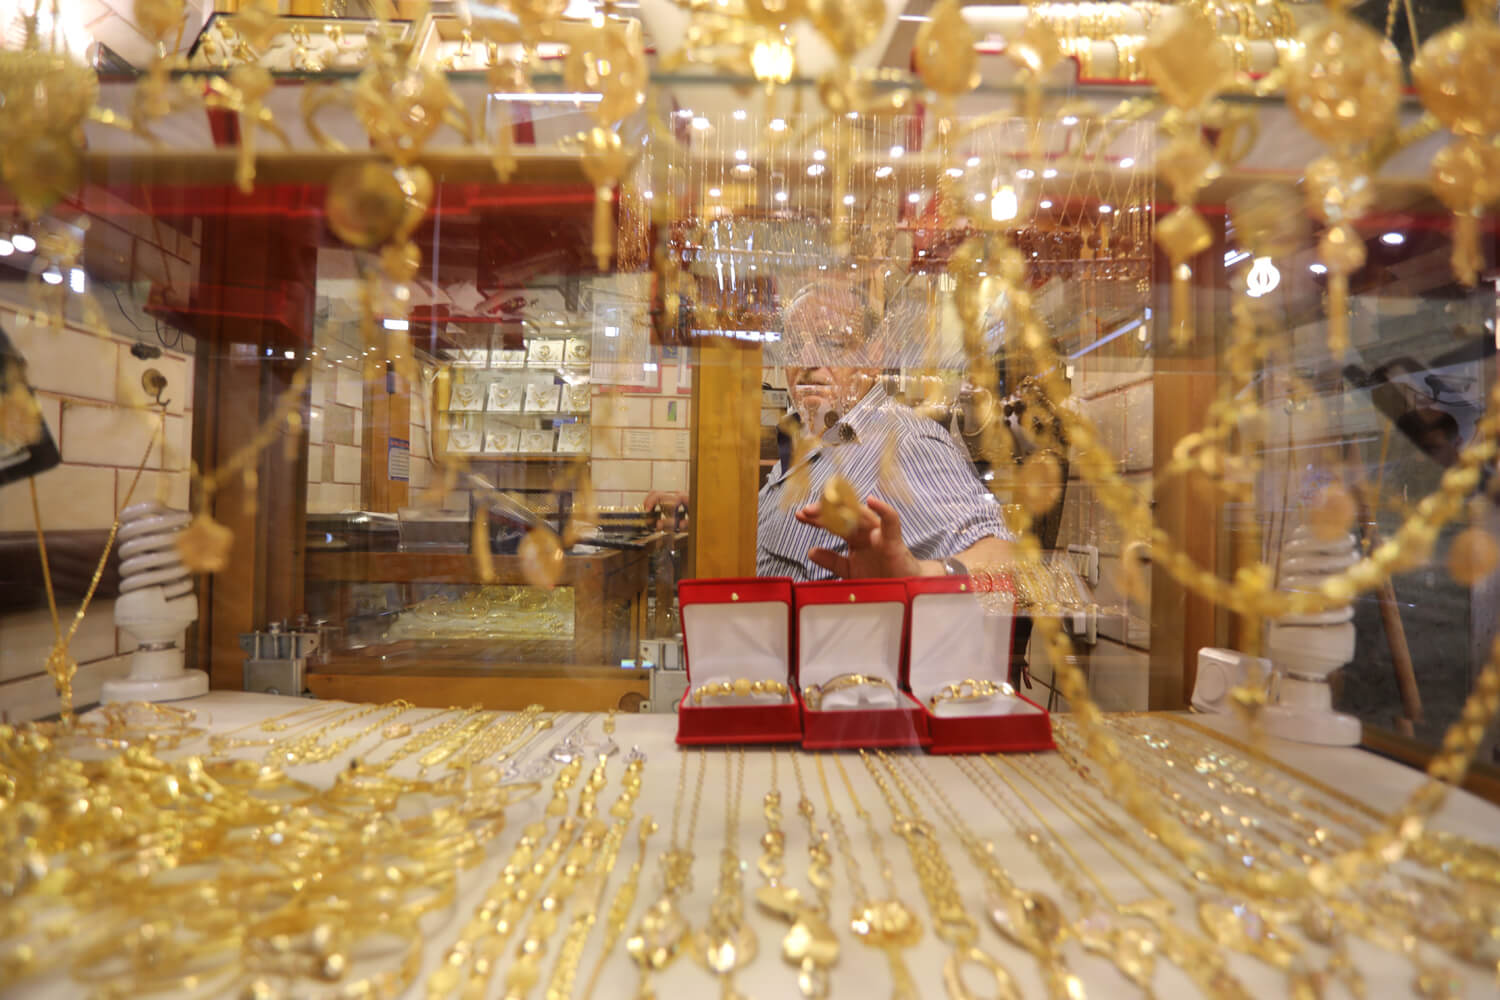 A gold shop in Gaza City's gold market. (Photo: Mohammed Asad)